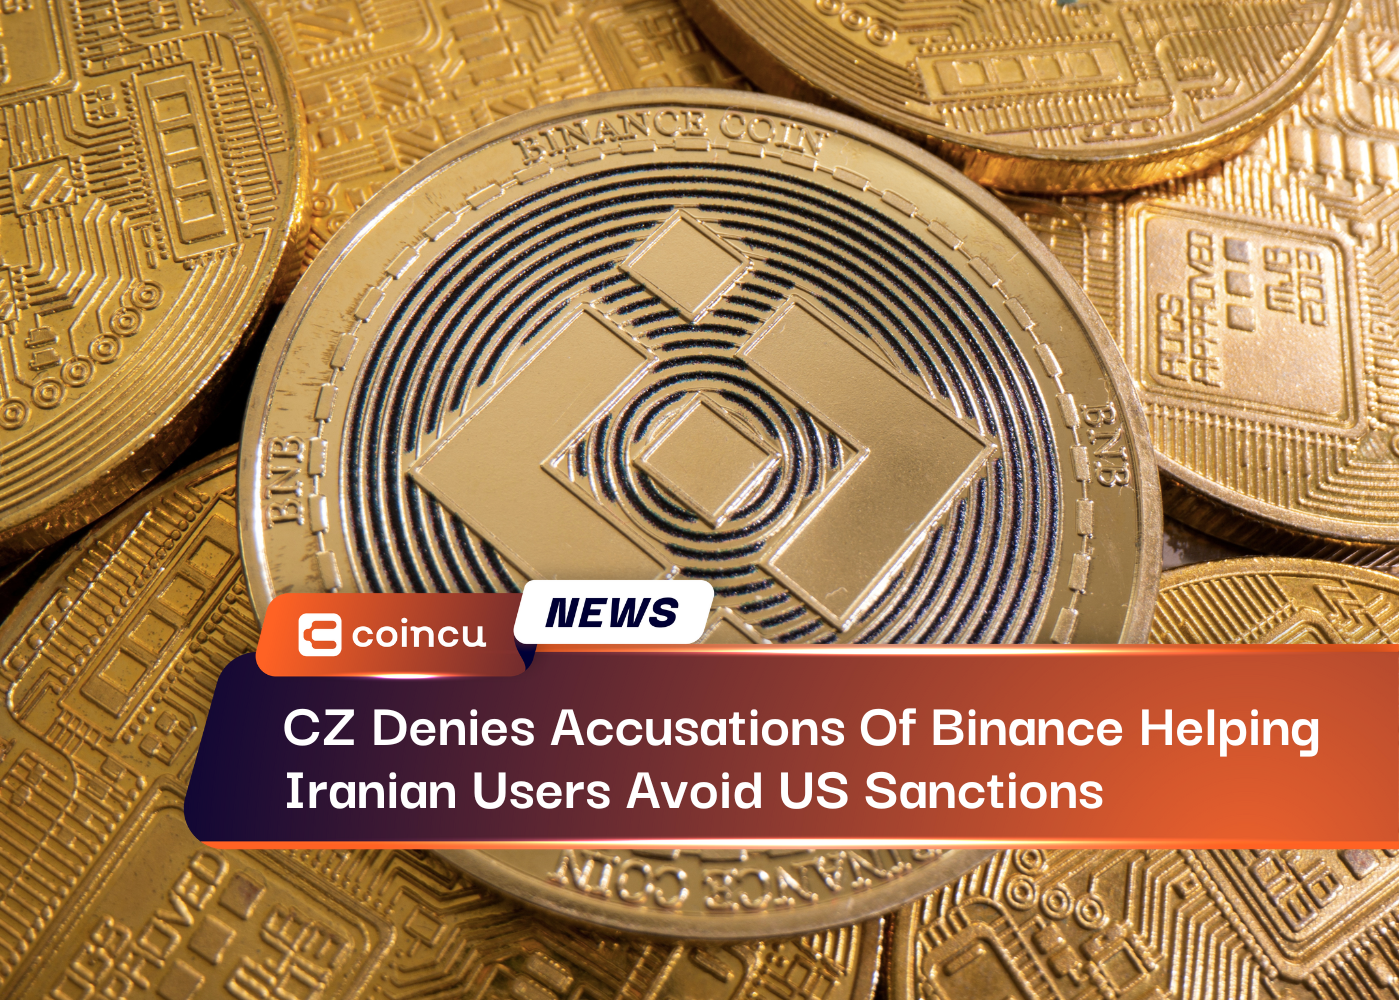 CZ Denies Accusations Of Binance Helping Iranian Users Avoid US Sanctions